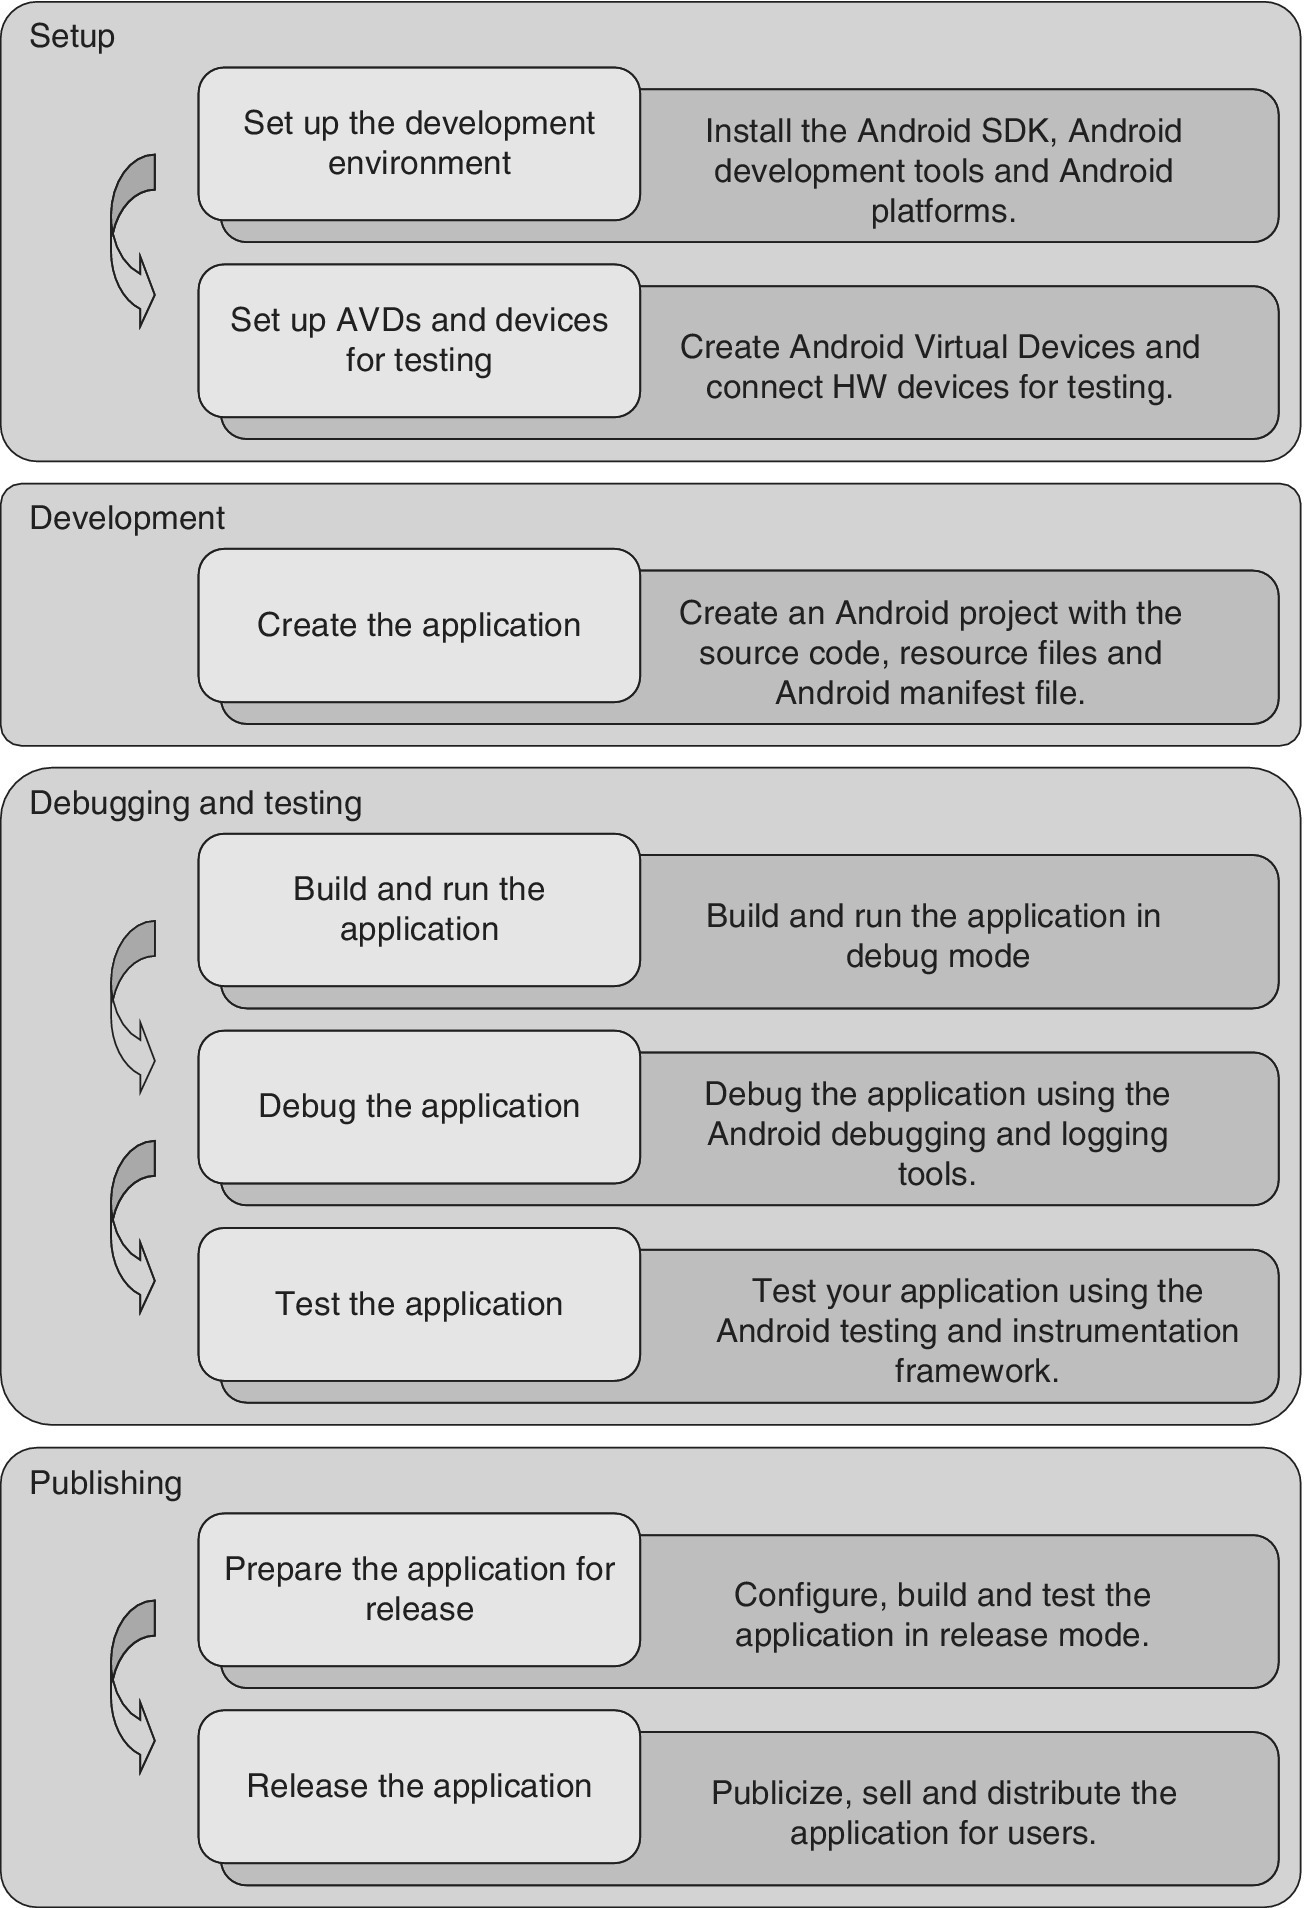 Block diagram of the development procedure for Android app development (top–bottom): setting up environment, AVDs, and devices for testing; creating the application; debugging and testing; and publishing.